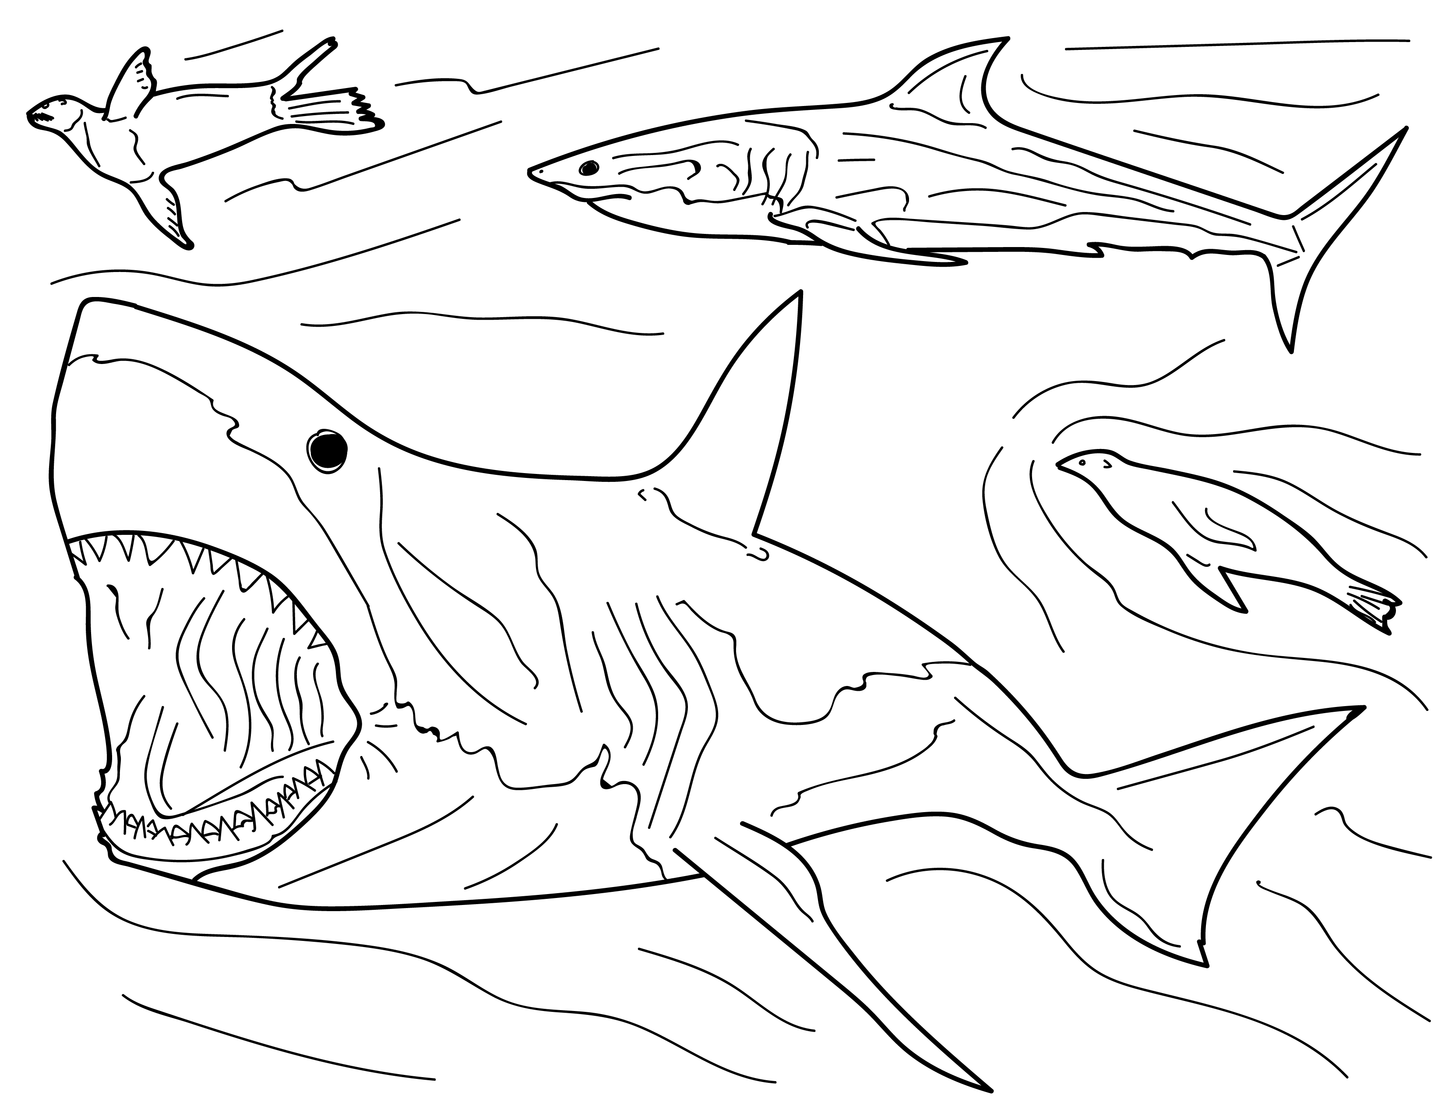 Sharks and Rays Educational Coloring Book